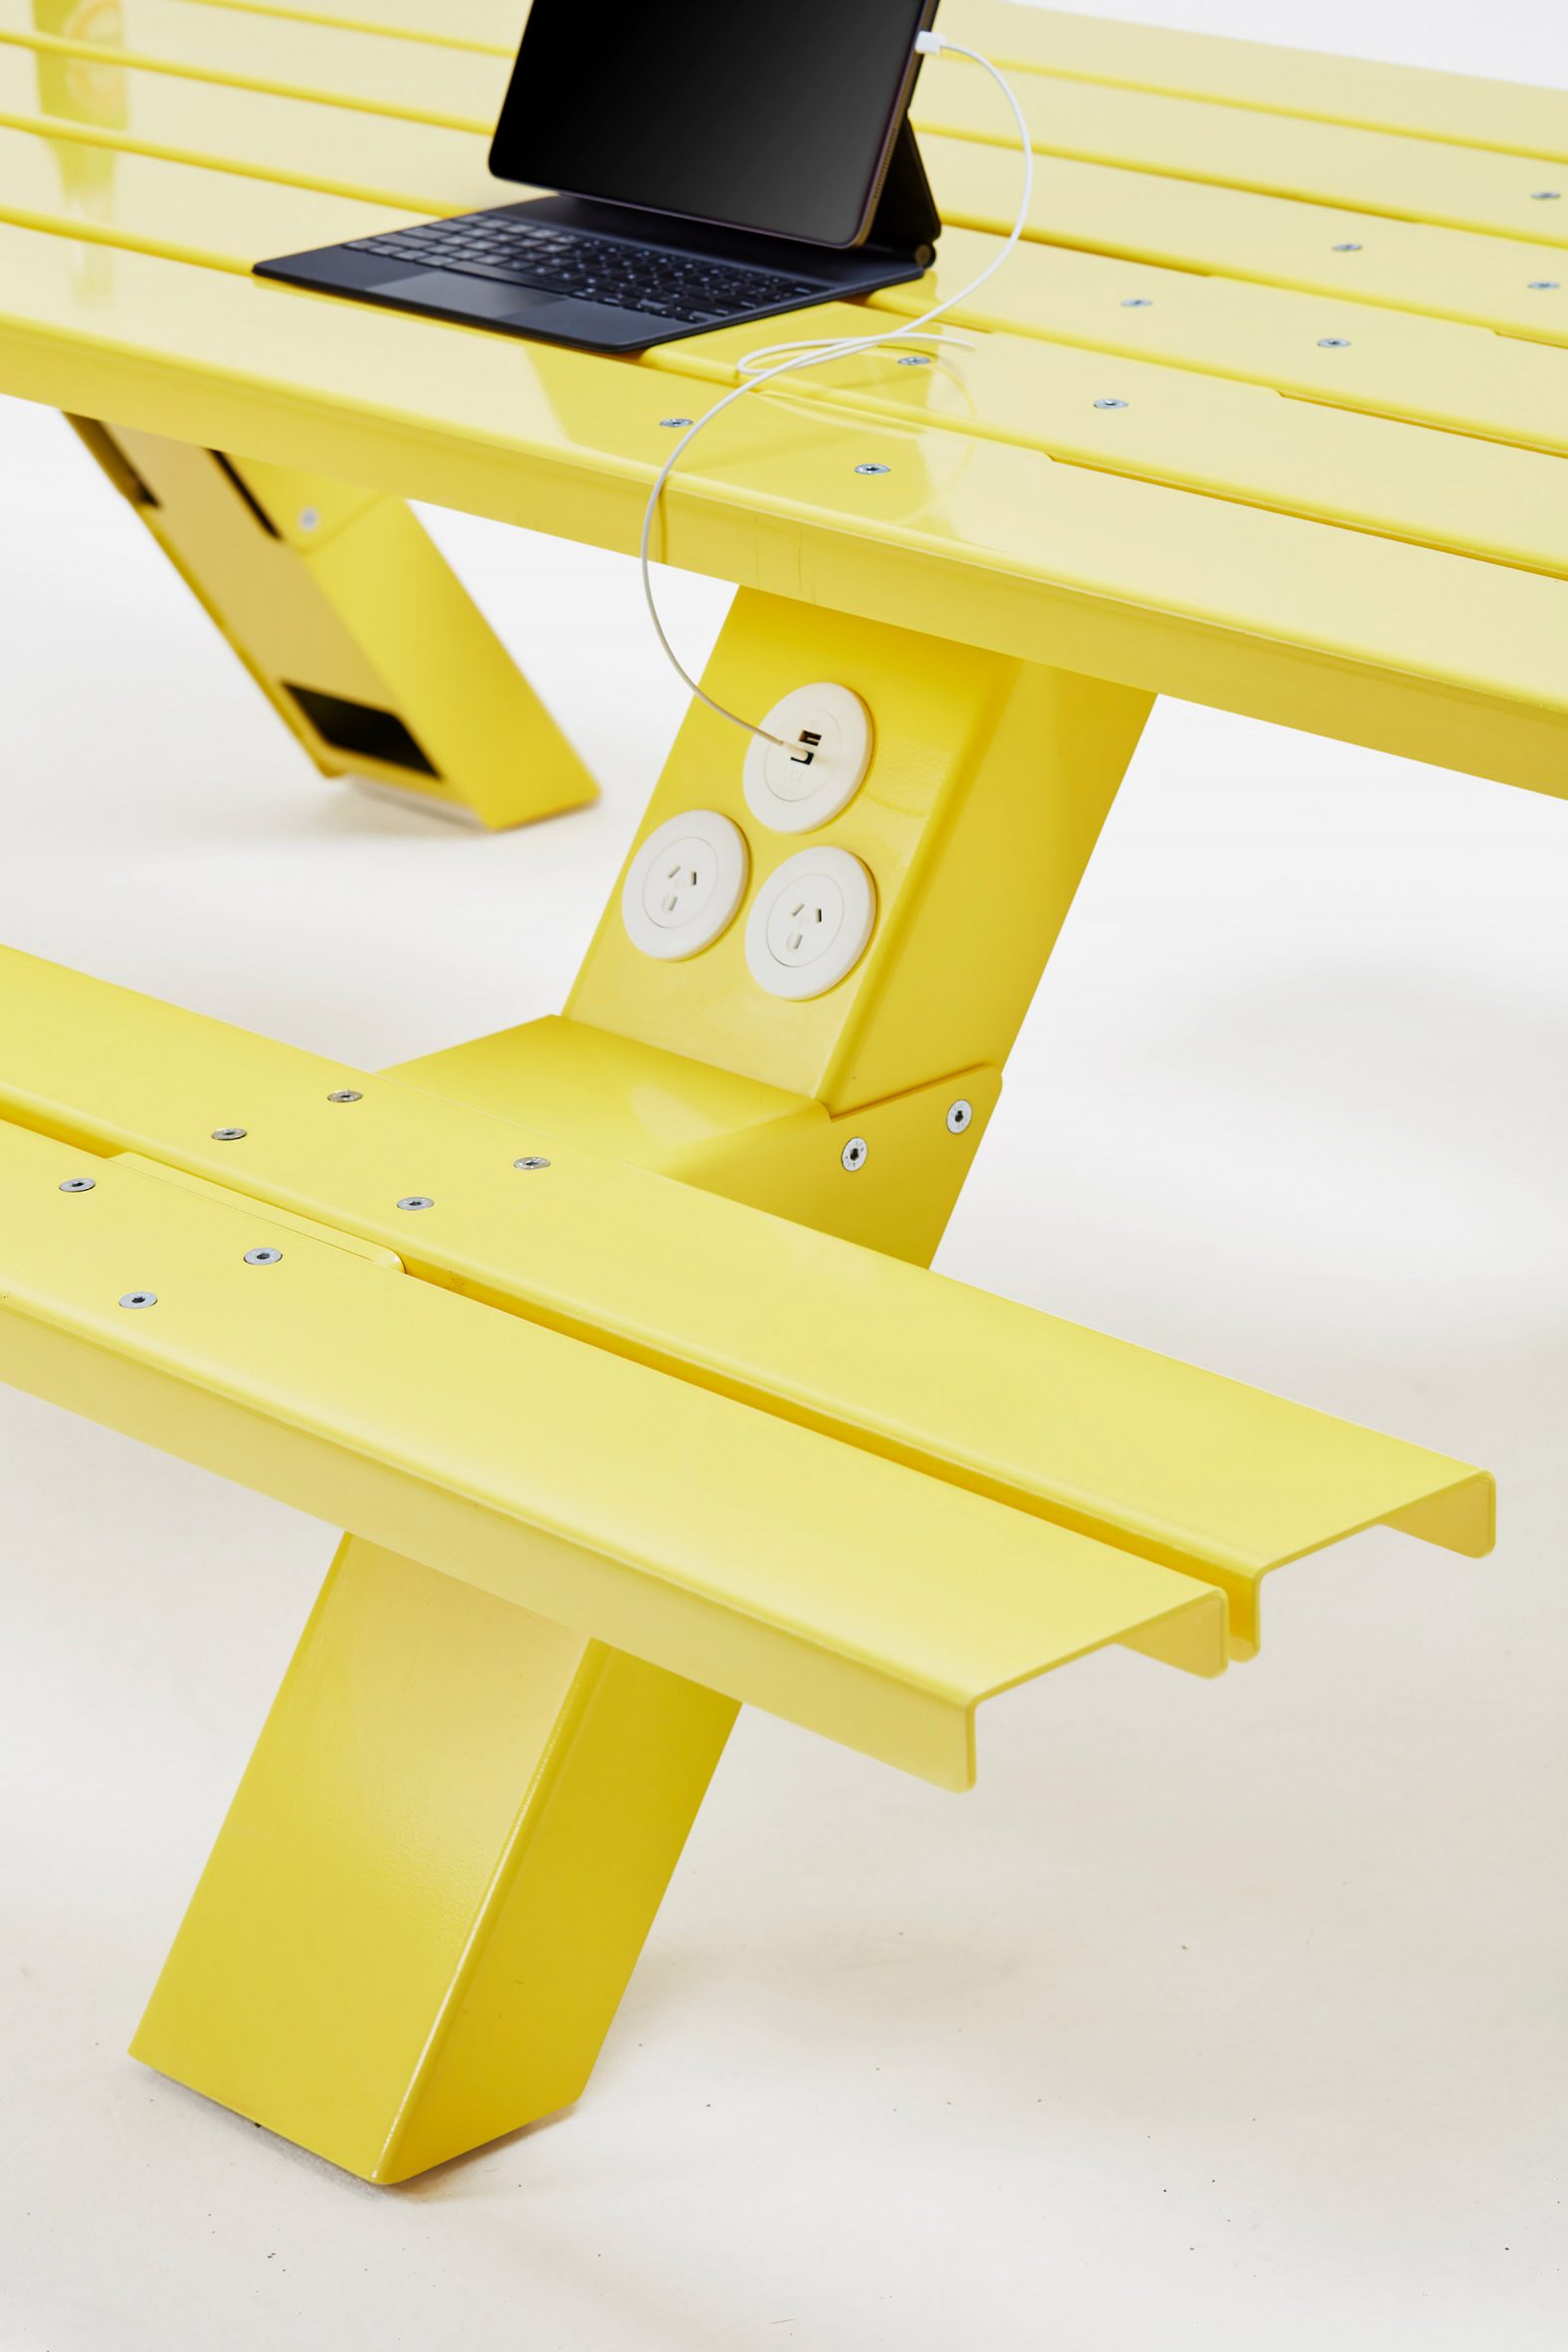 Detail of yellow Mass table by Alexander Lotersztain for Derlot